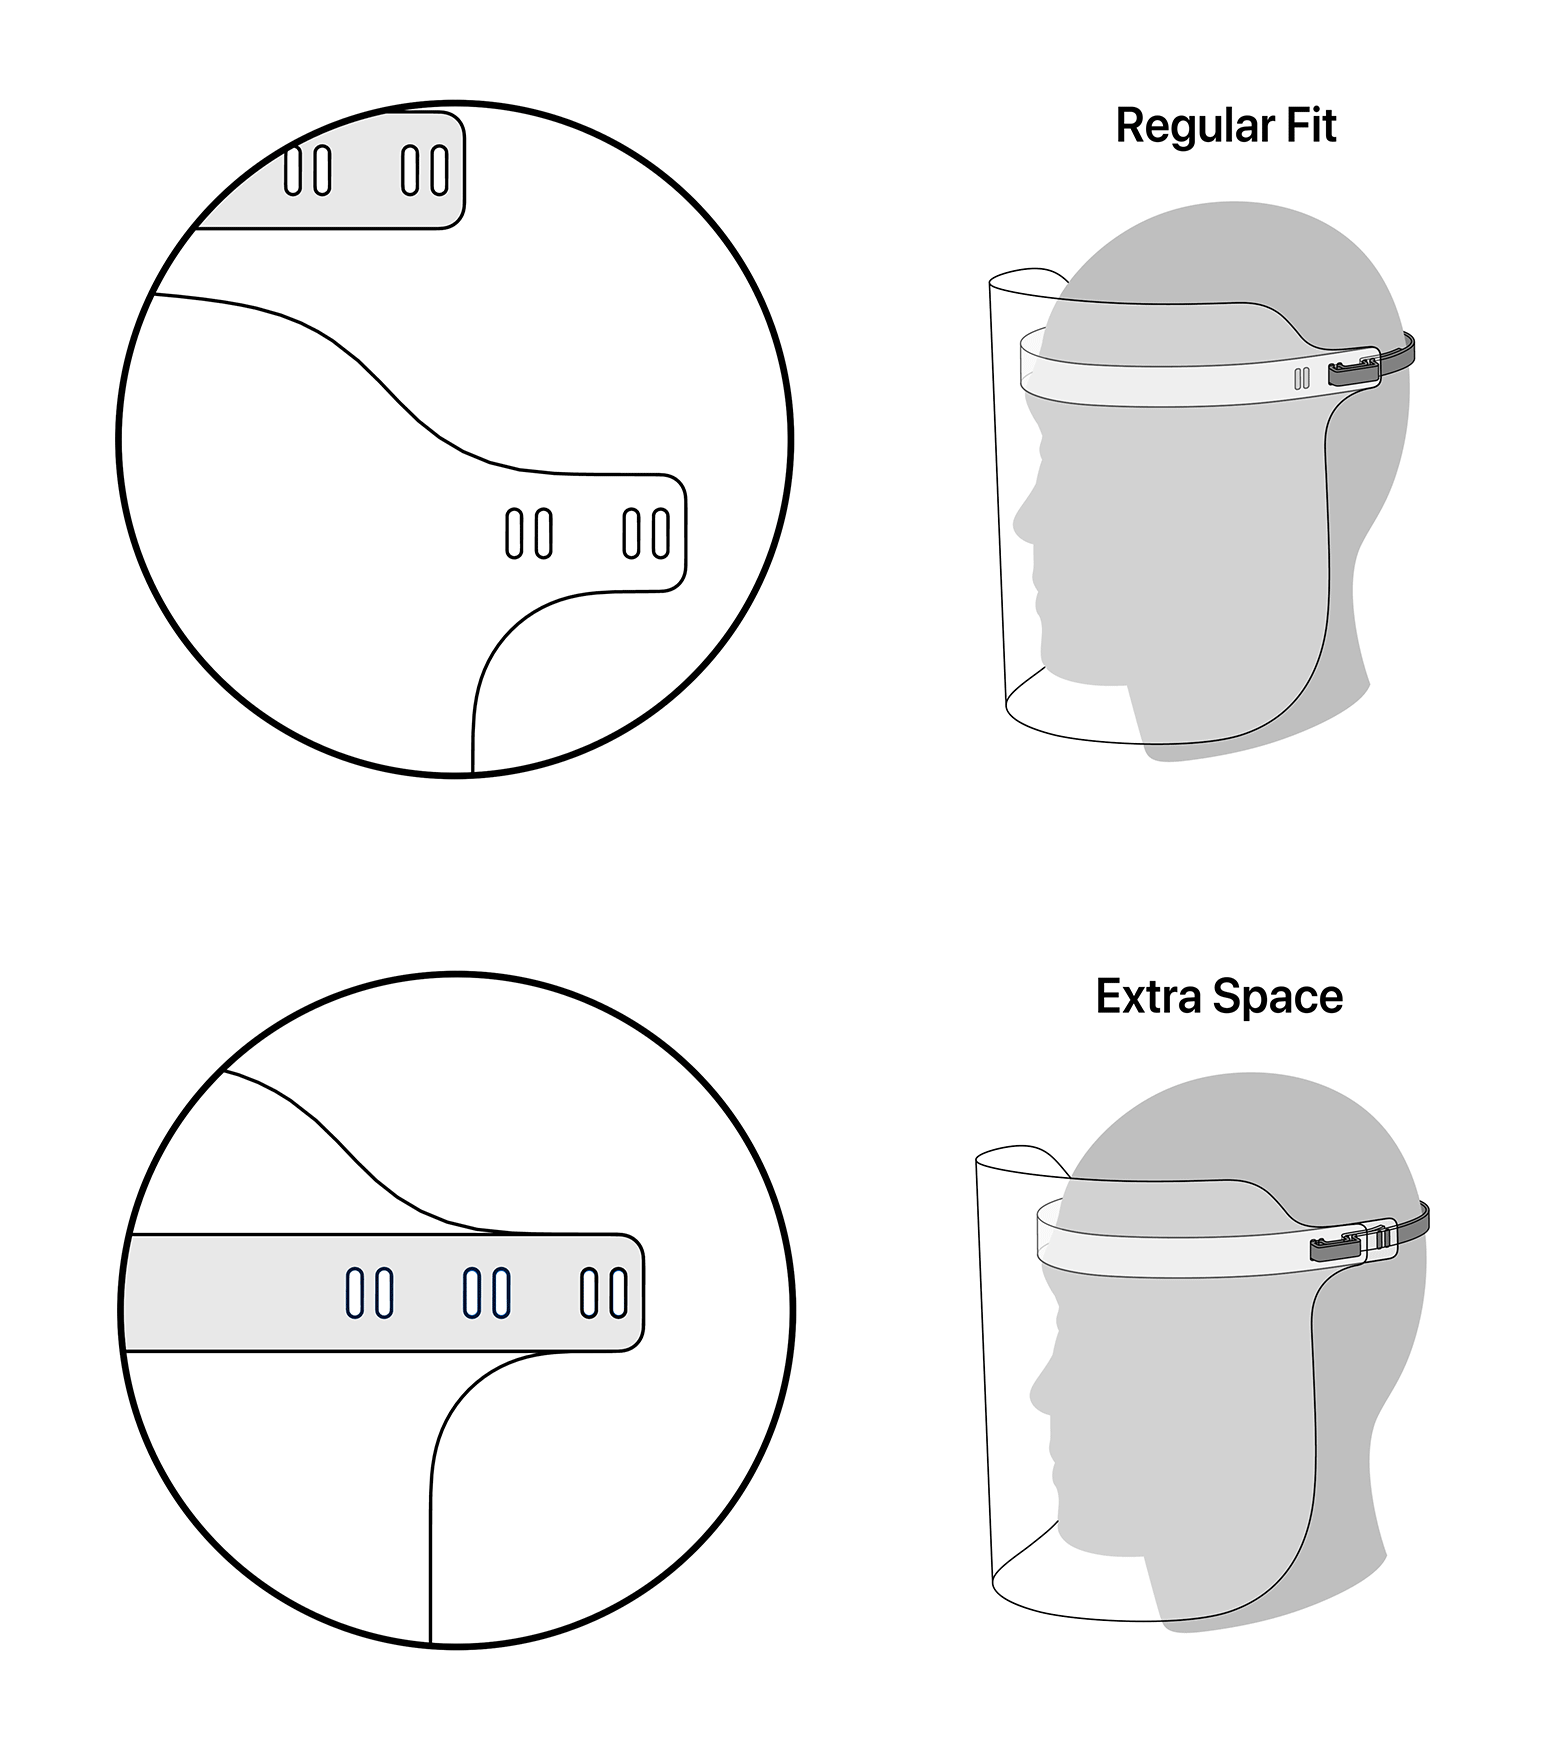 Apple publishes instructions and fitting guide for its new face shields